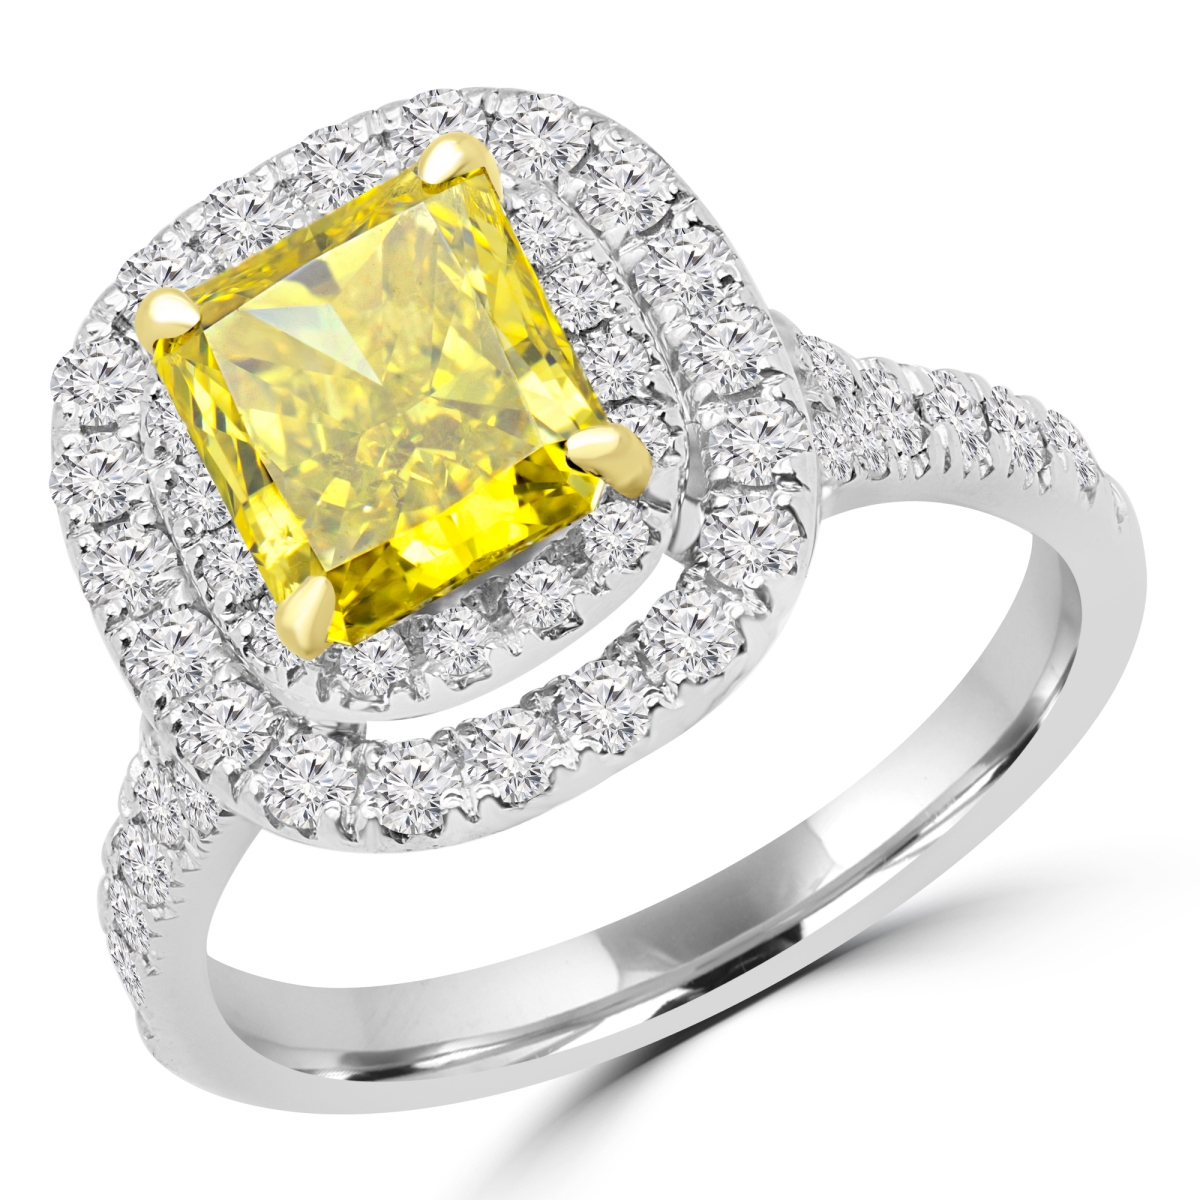 Picture of Majesty Diamonds MD170146 2.37 CTW Radiant Vivid Yellow Diamond Vintage Double Halo Engagement Ring in 14K